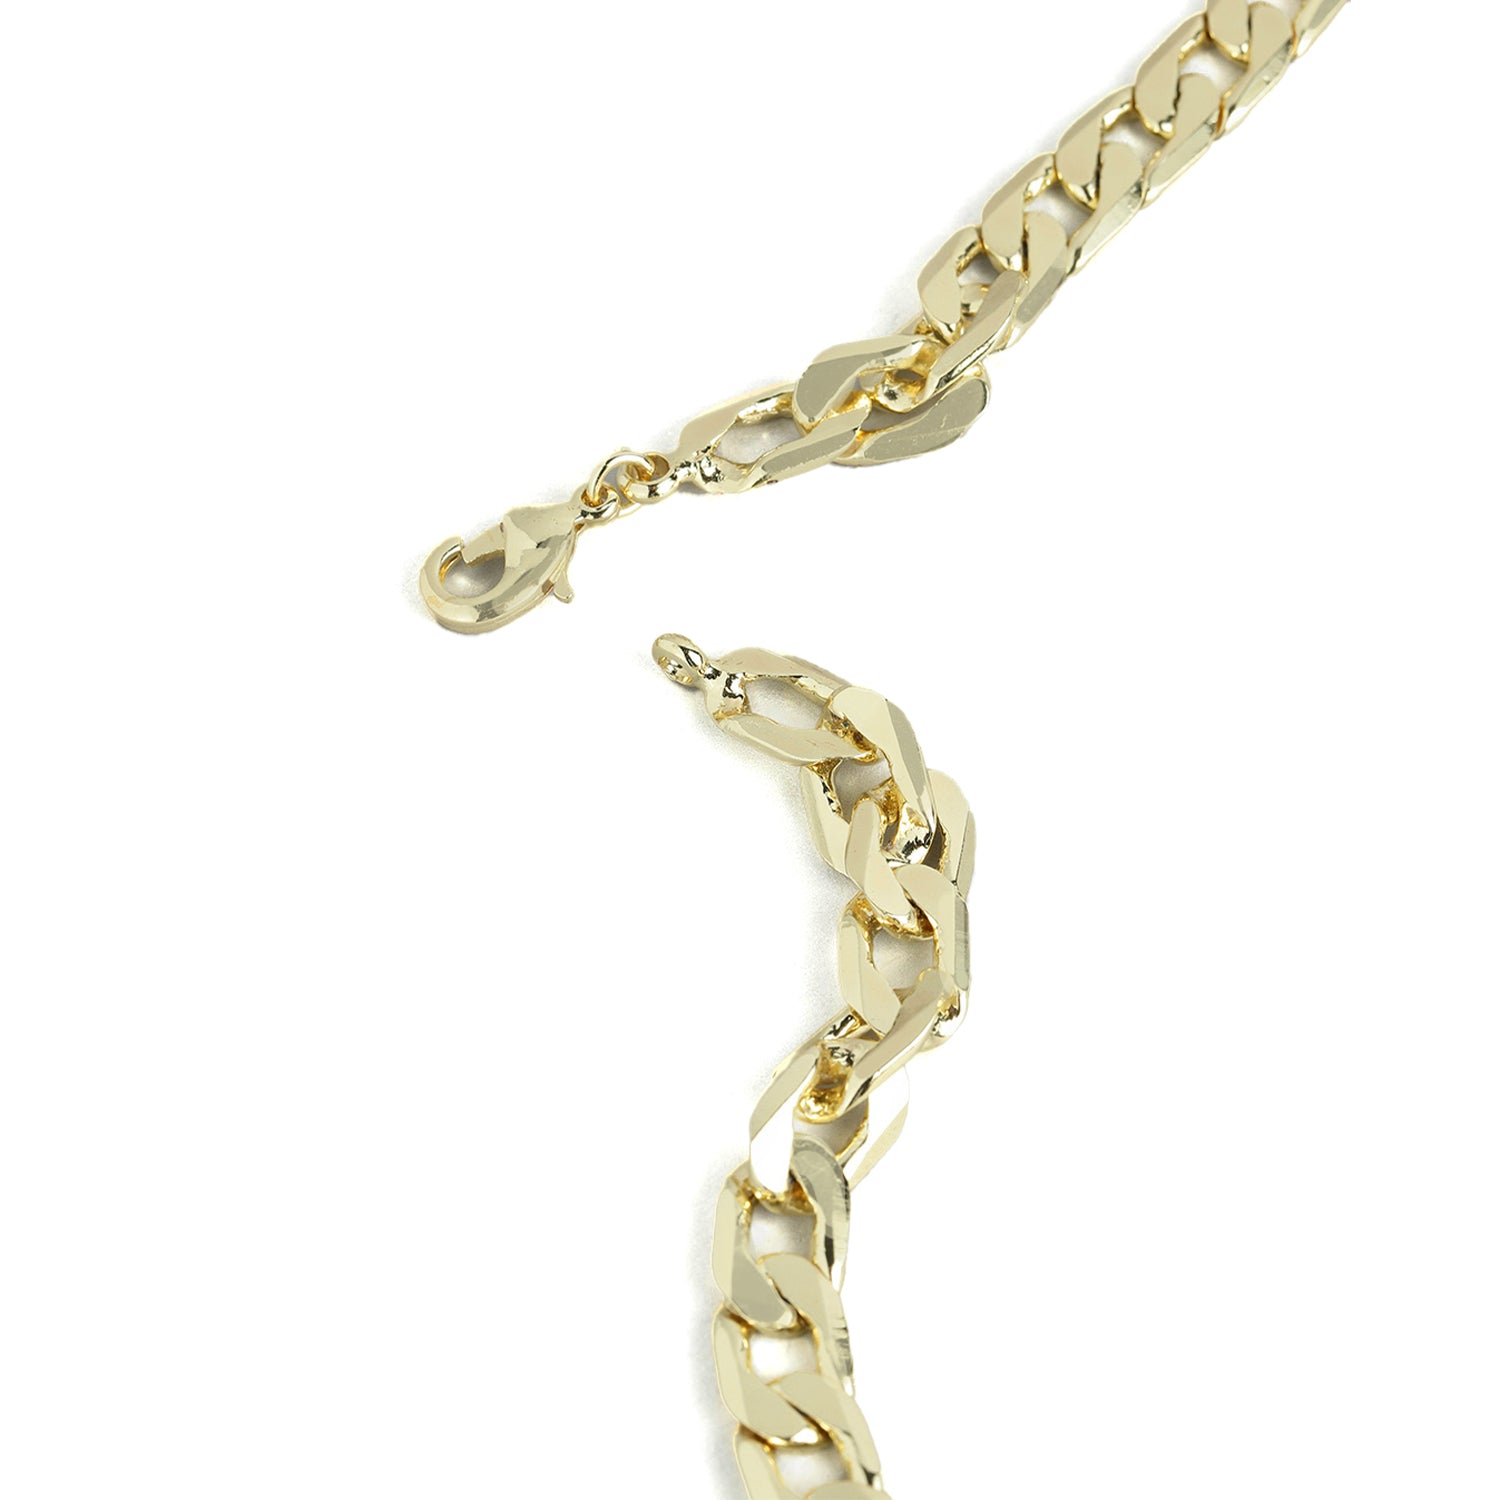 Buy Gold Chain 22K Gold Link Chain Fine Jewelry Online in India - Etsy